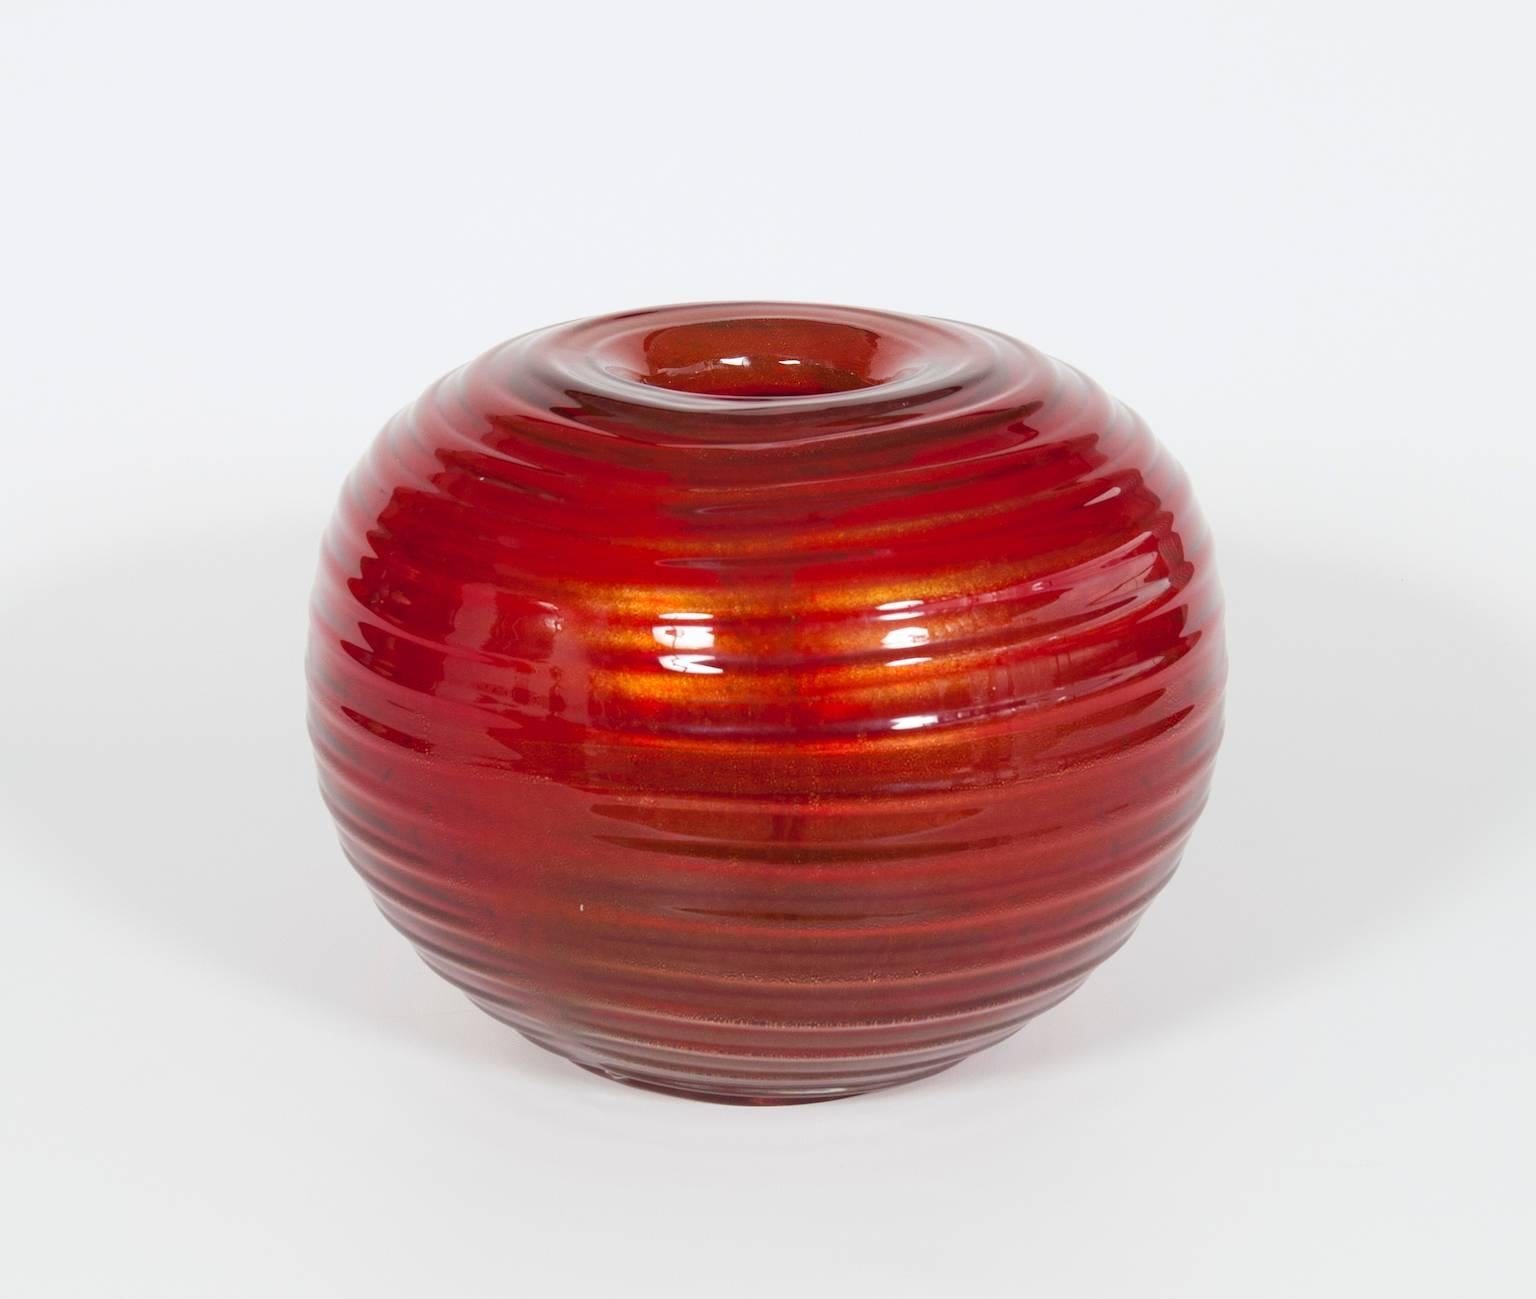 Italian Murano glass vase in red and gold, with in the front a decorative gold drop, in very excellent original condition, attributed to Seguso around 1960s. The vase measures: 9.84 inches high, by 12.60 inches diameter.